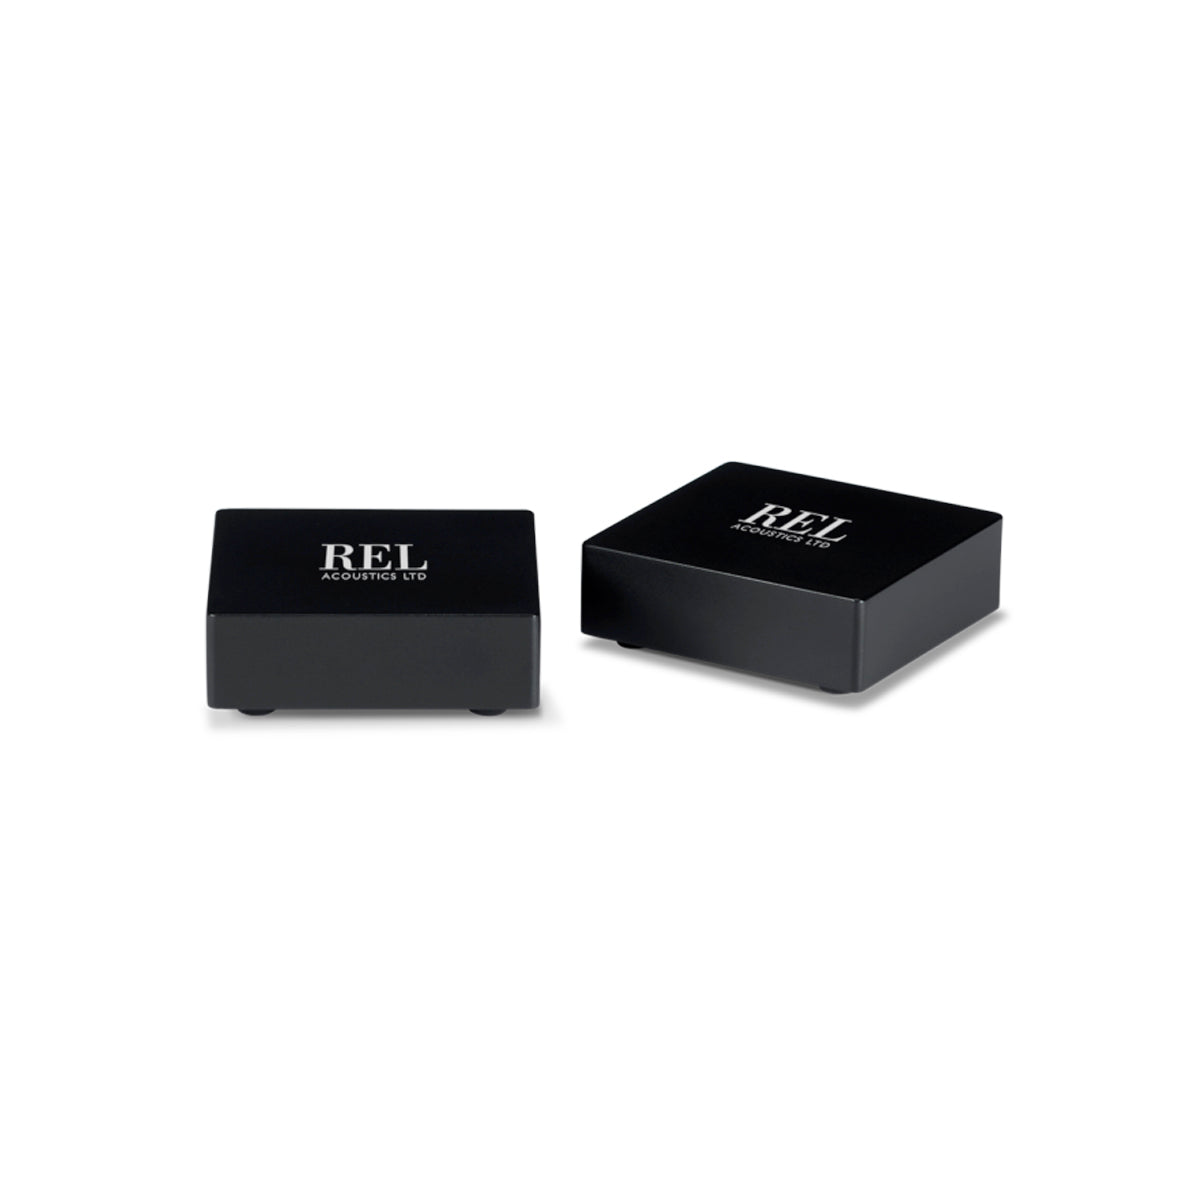 REL HT-Air Wireless Transmitter - The Audio Experts